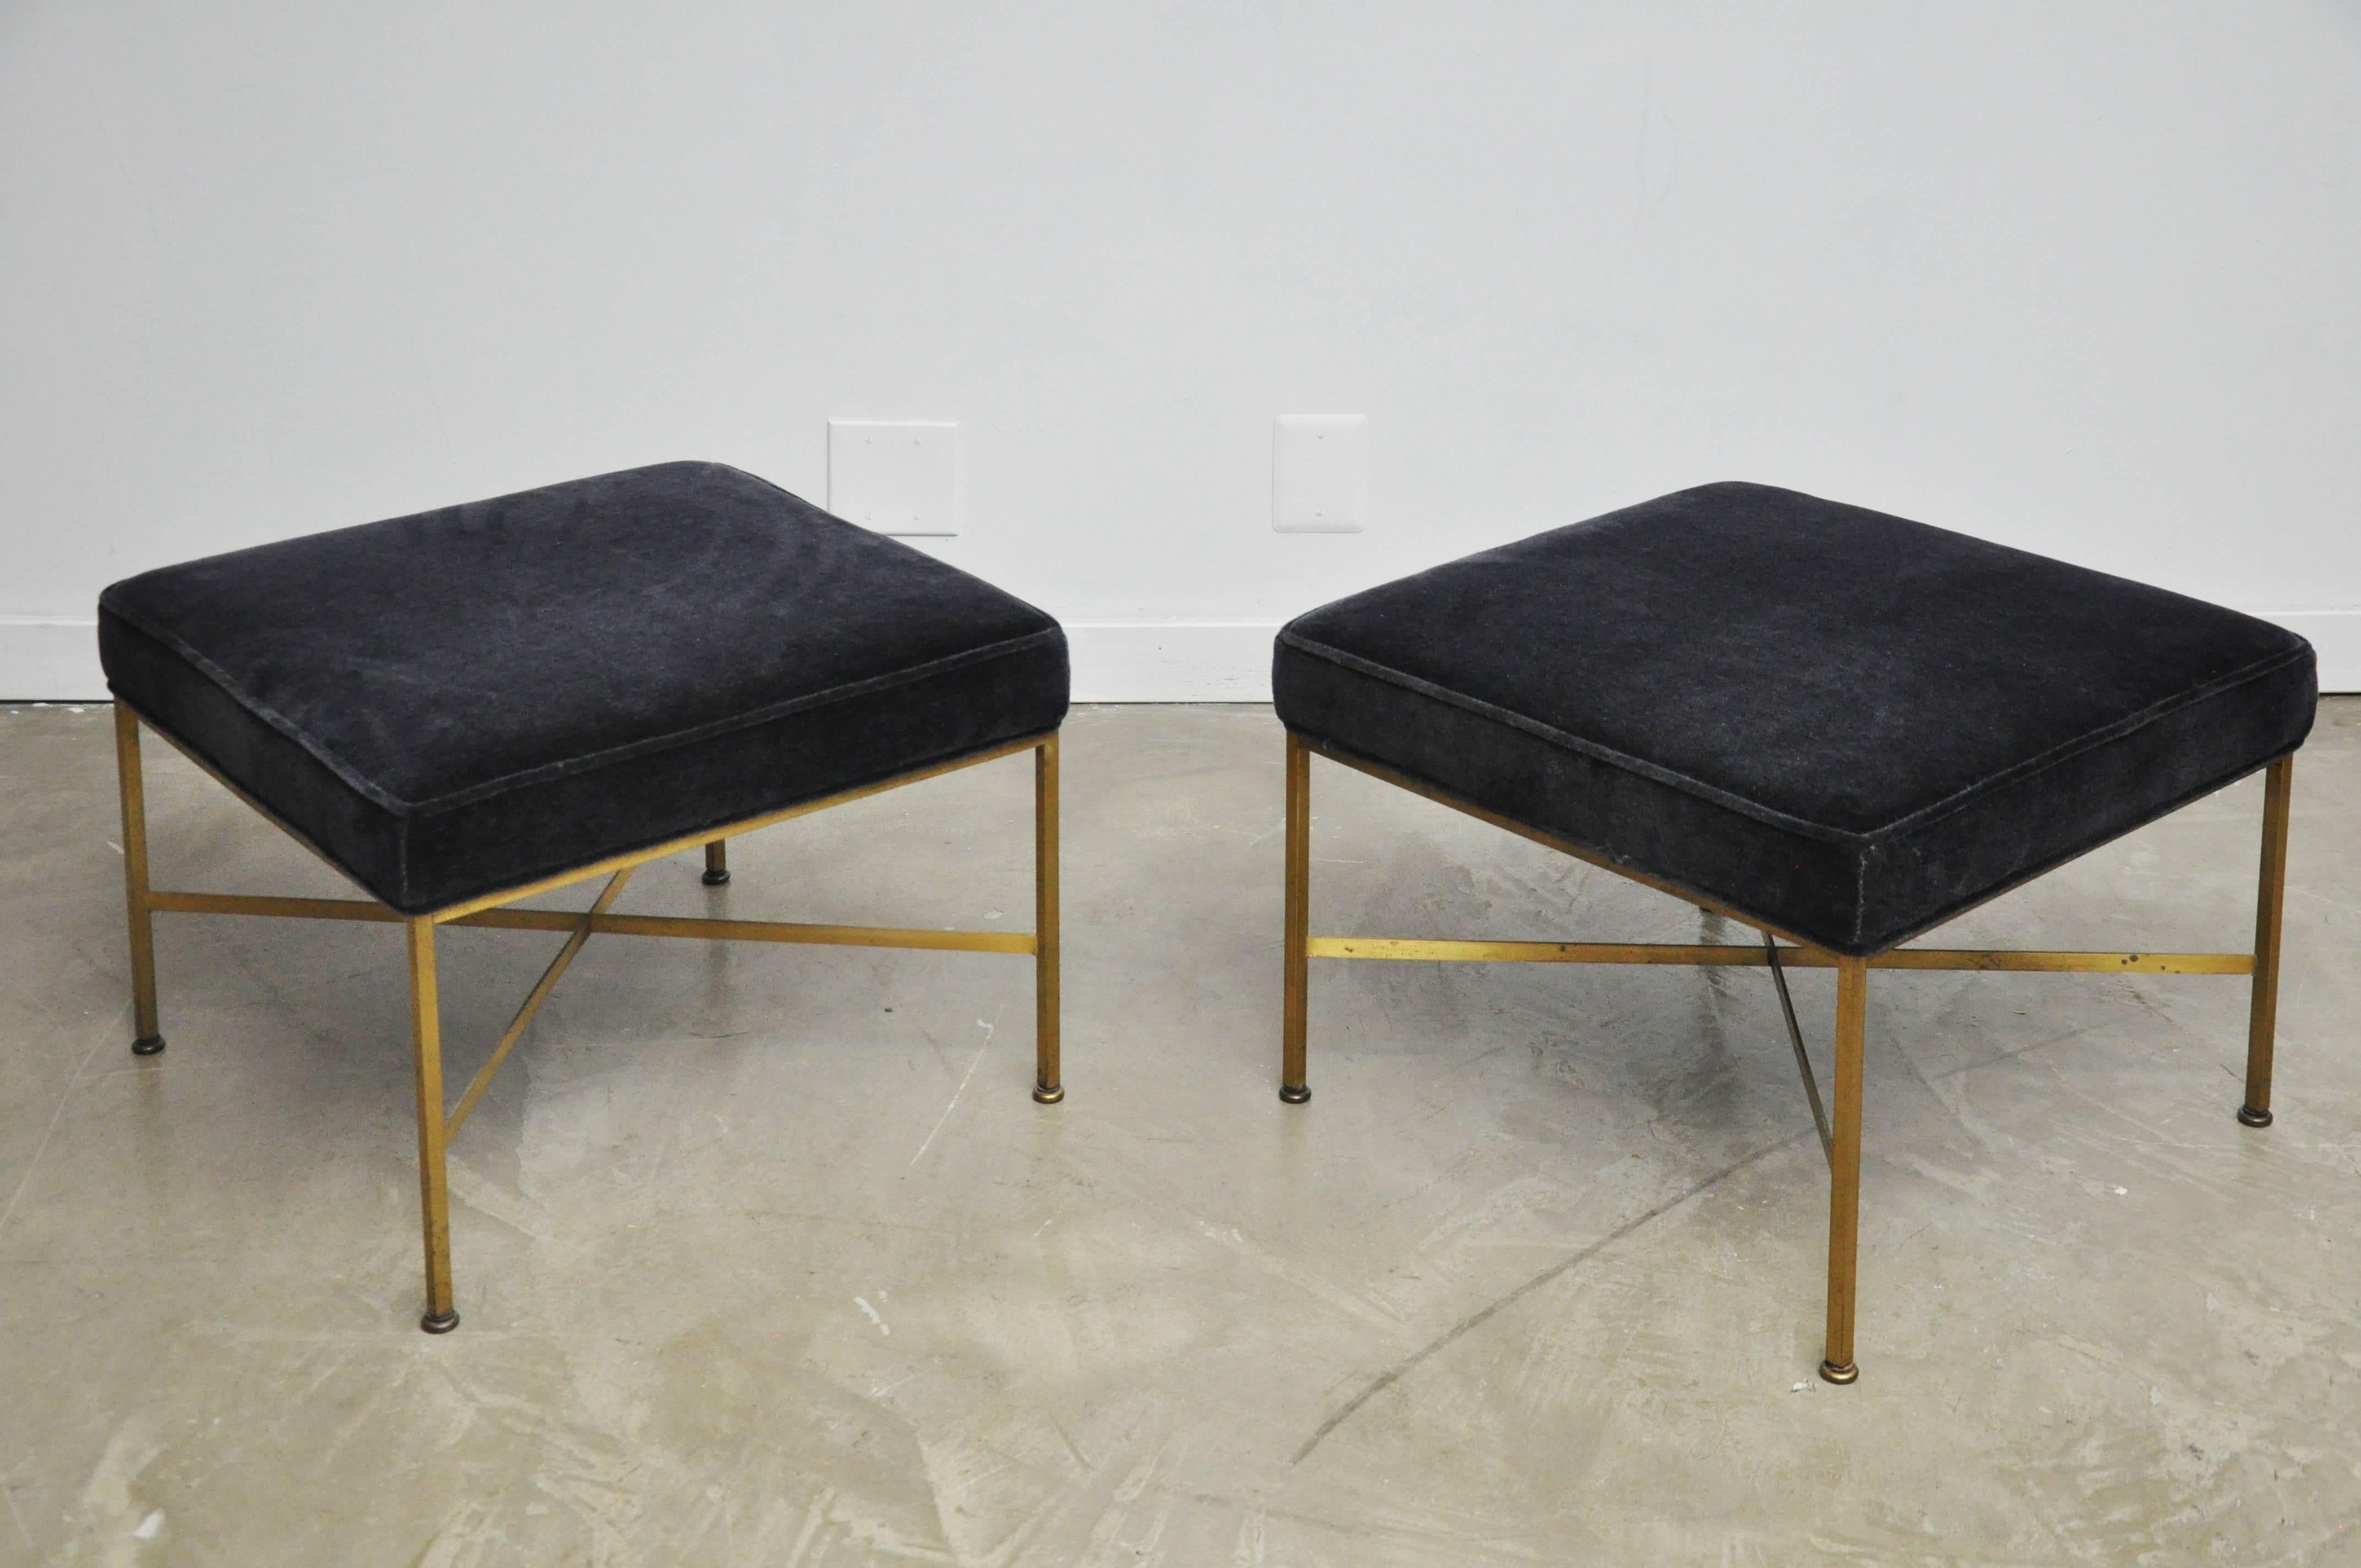 Pair of brass X-base stools Paul McCobb for Calvin furniture. New black mohair cushions over brass bases with nice original patina.